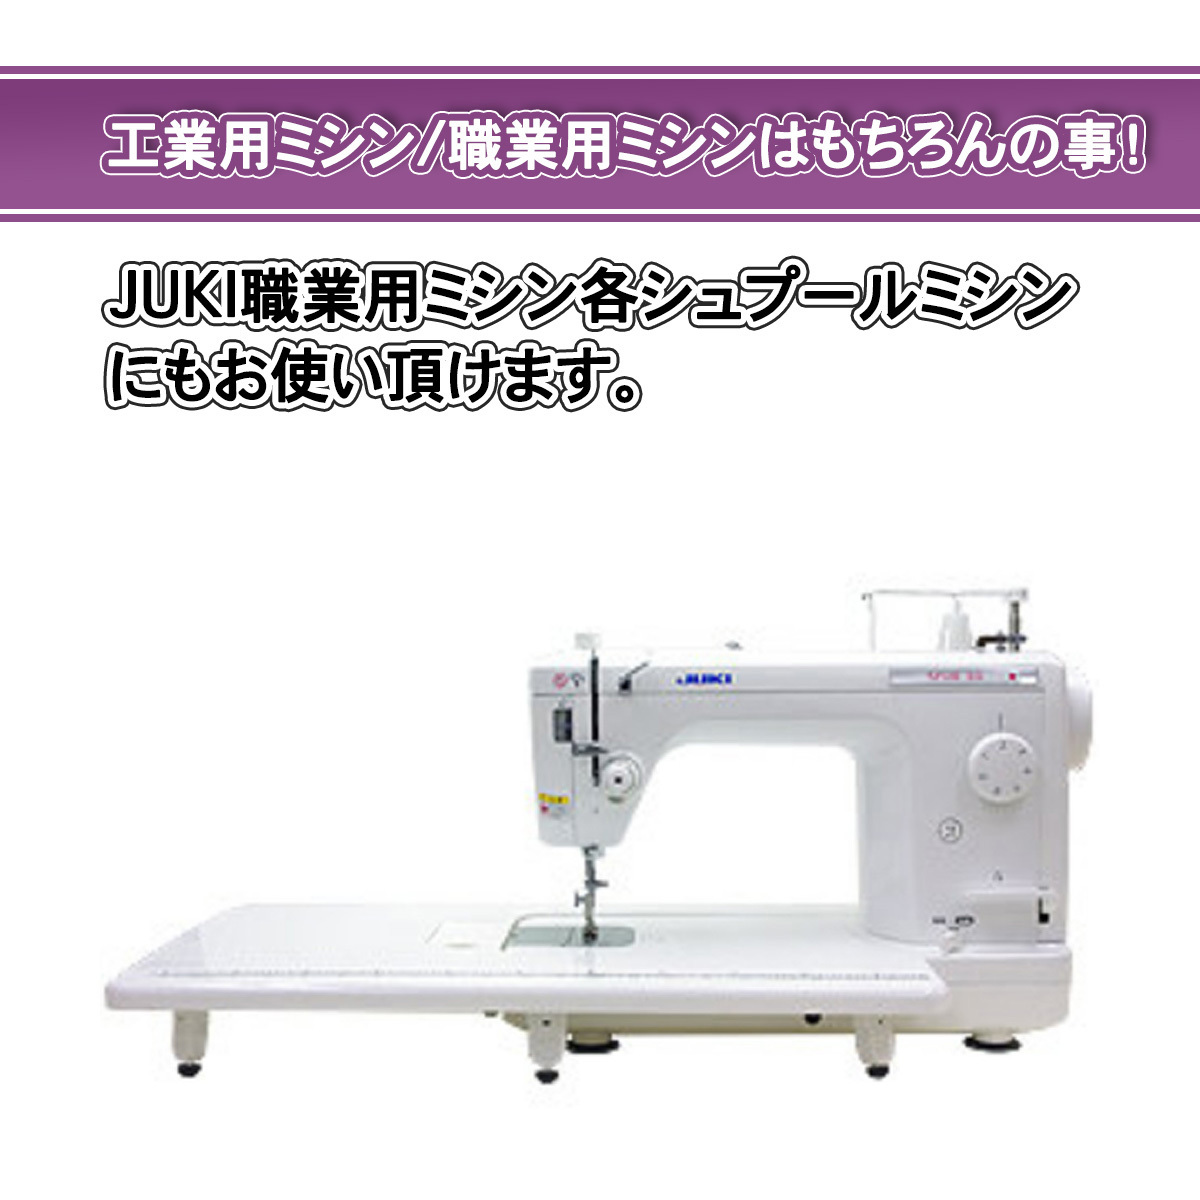  sewing machine pushed ..gya The - taking . car - ring industry for sewing machine occupation for sewing machine Juki sewing machine supplies parts parts Attachment accessory parts 